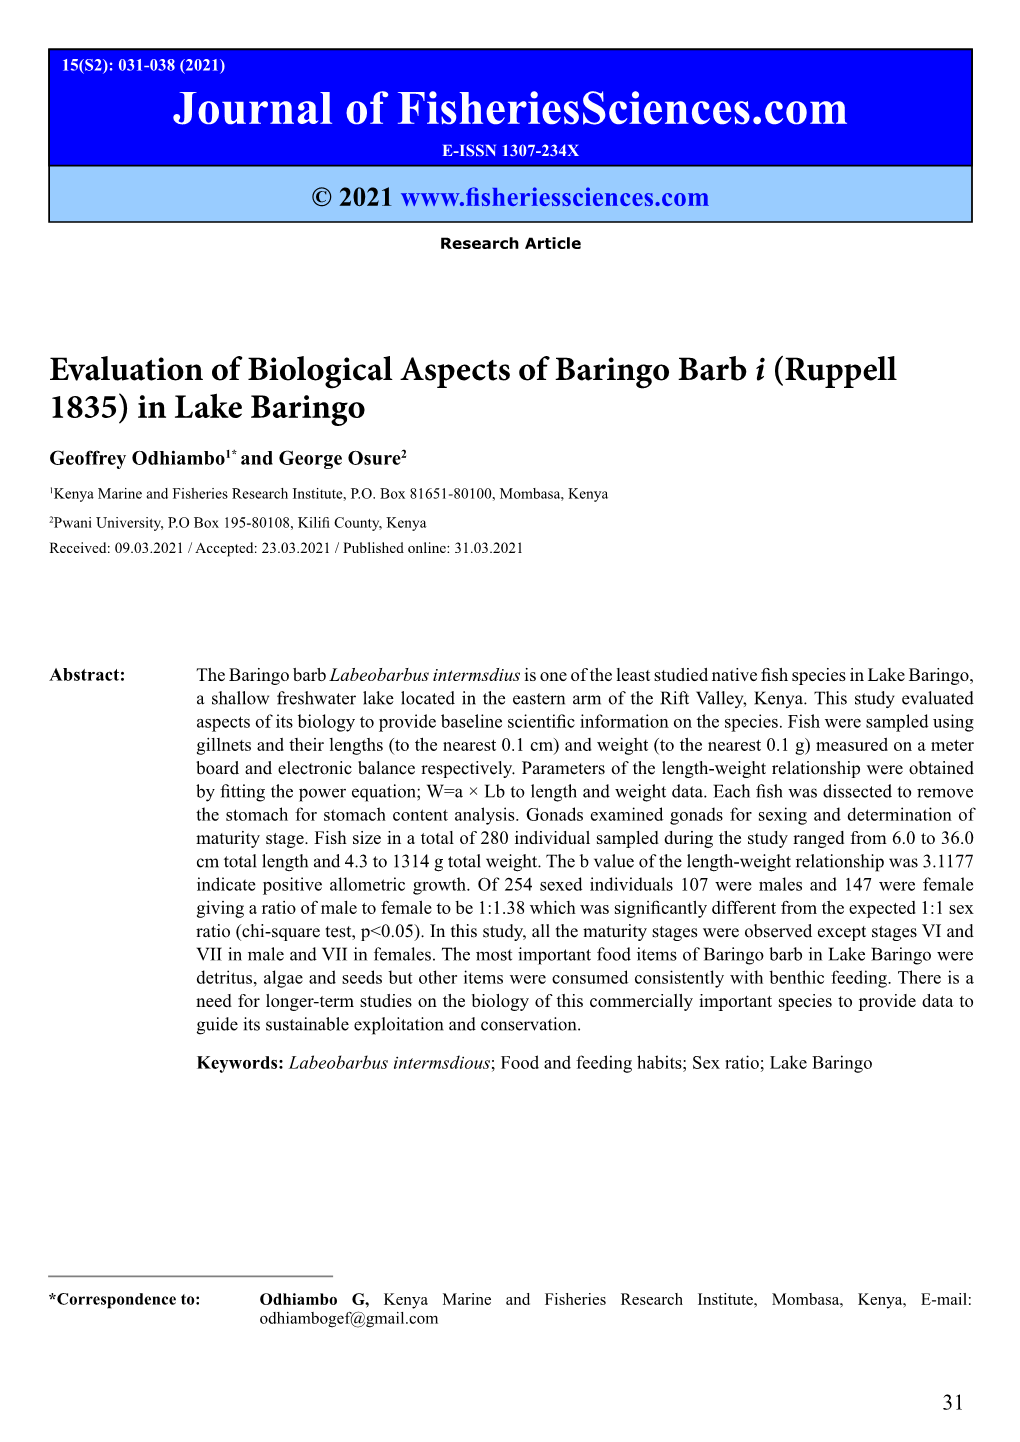 Evaluation of Biological Aspects of Baringo Barb I (Ruppell 1835) in Lake Baringo Geoffrey Odhiambo1* and George Osure2